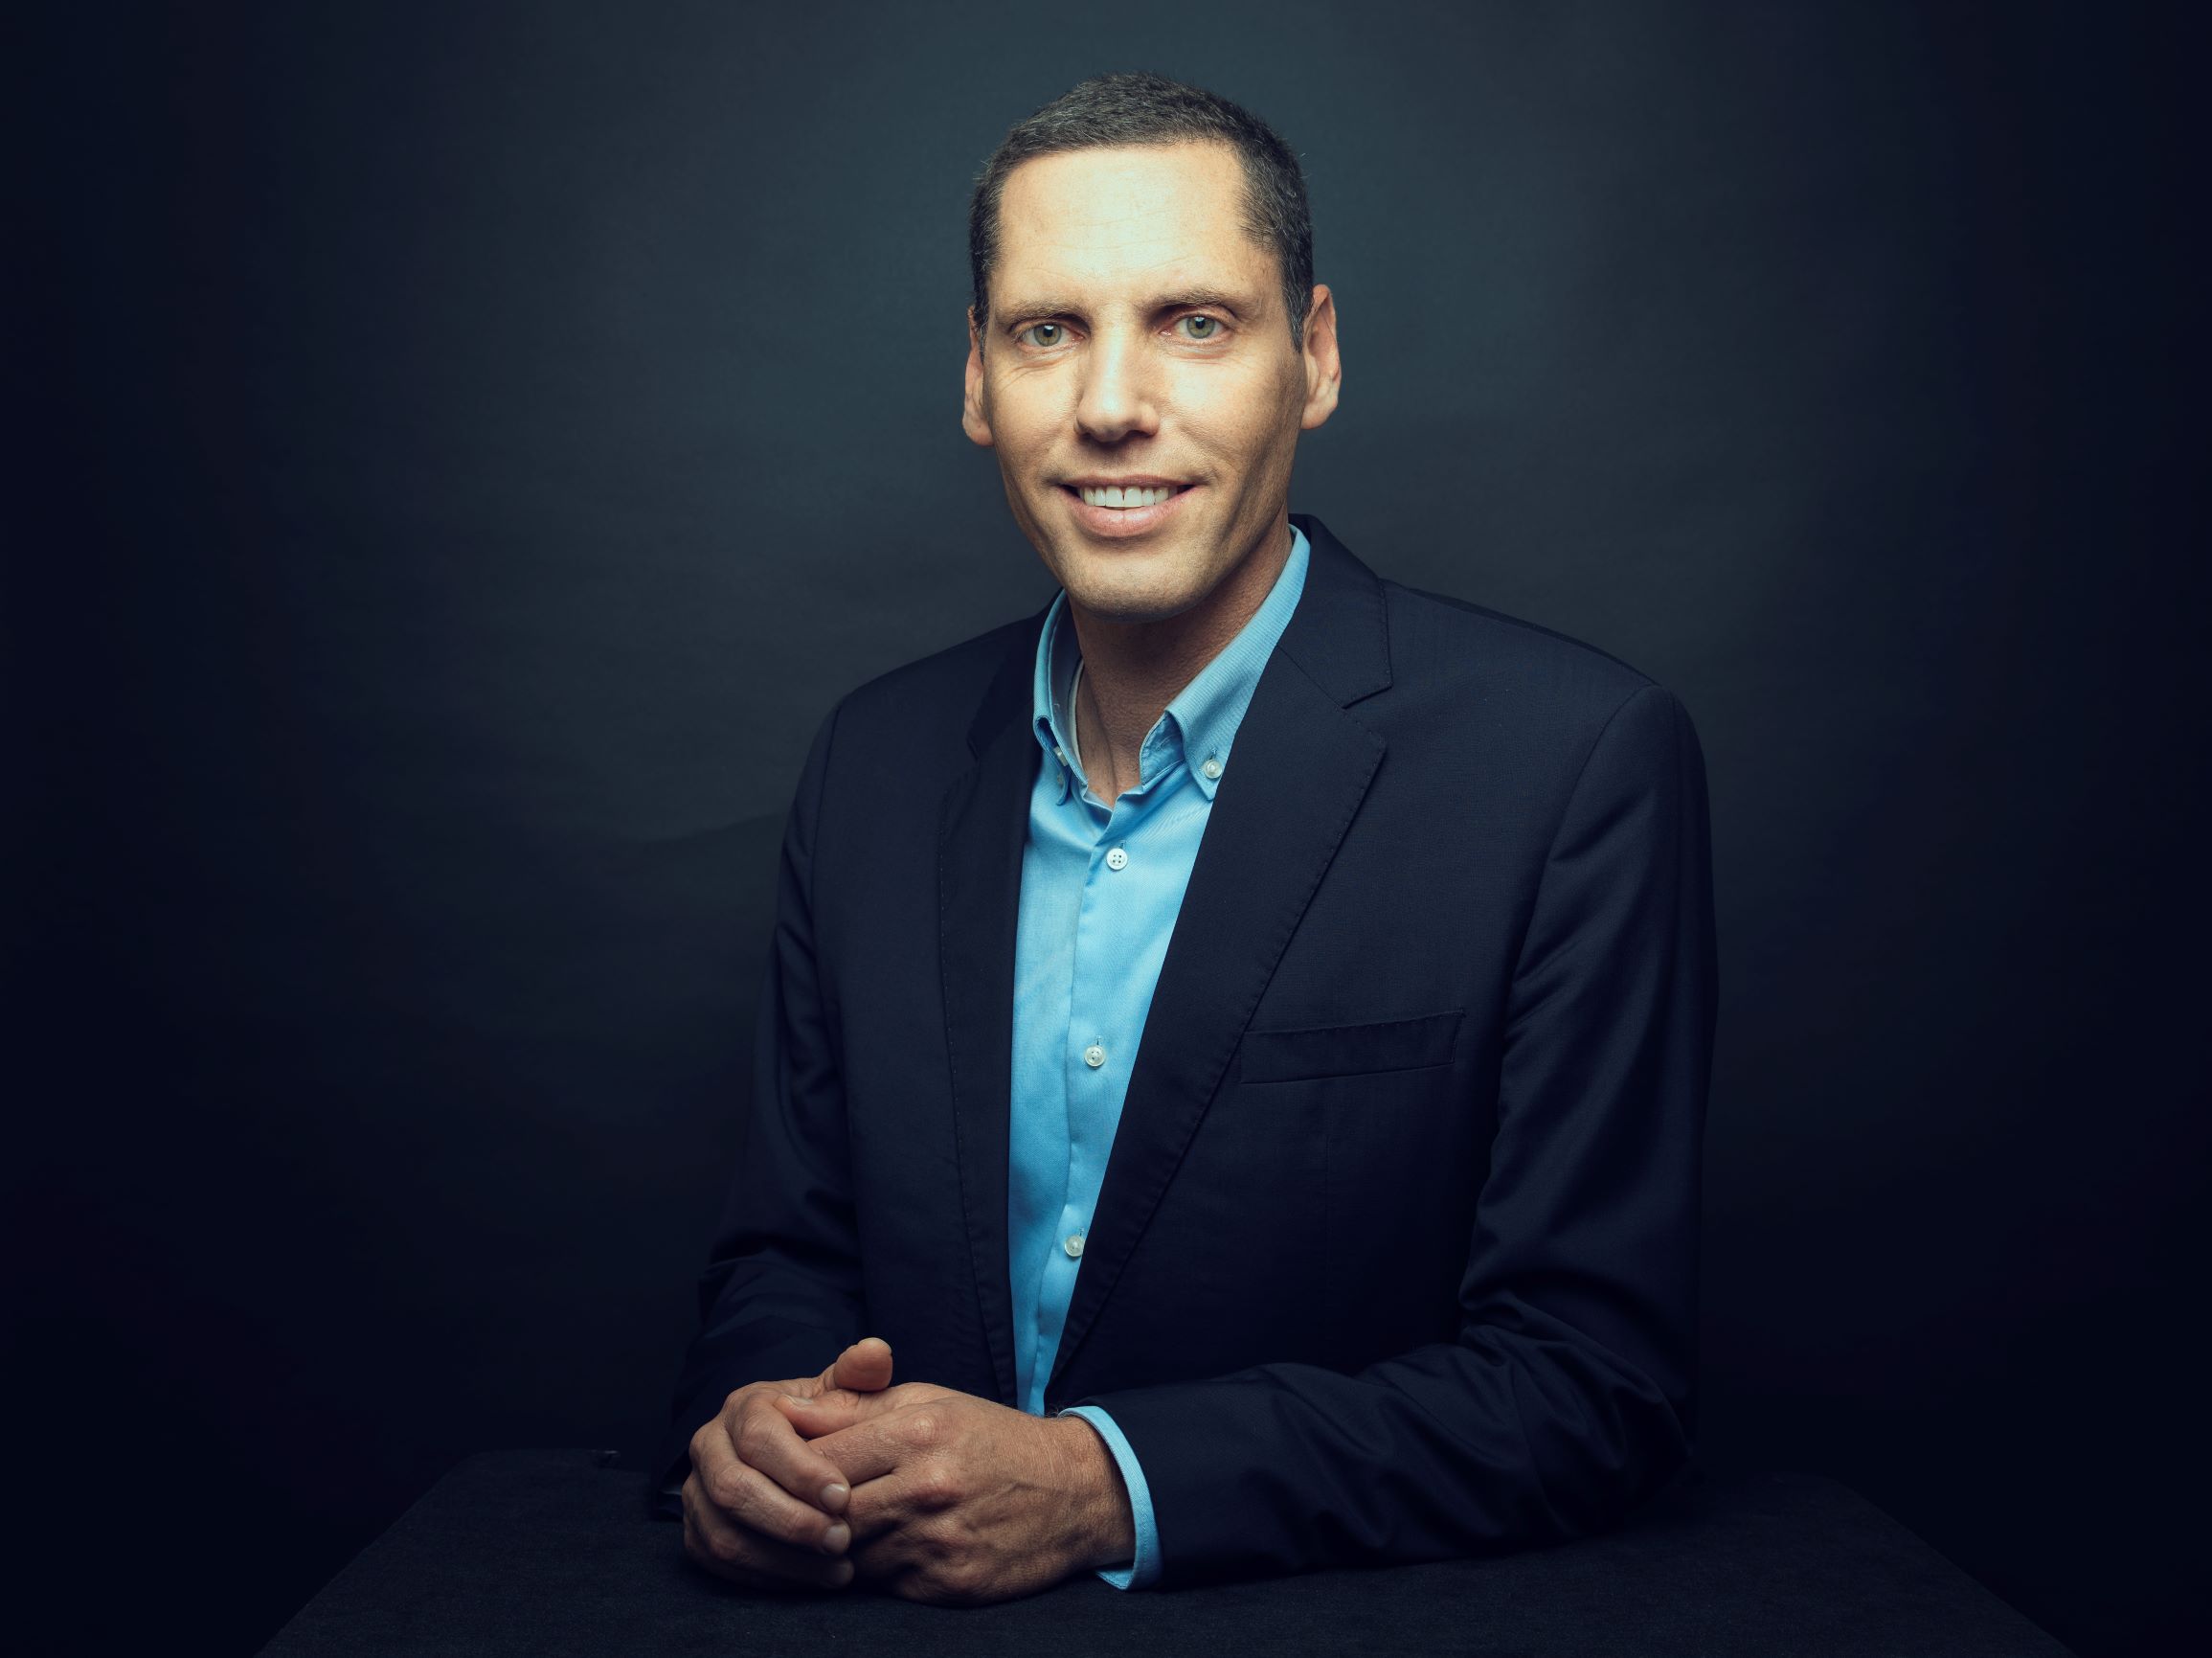 Lior Pais, CEO Has been active in the Israeli capital market for more than 15 years and has extensive knowledge of the entire field of the Israeli capital market, with an emphasis on expertise in underwriting, public and private offerings 